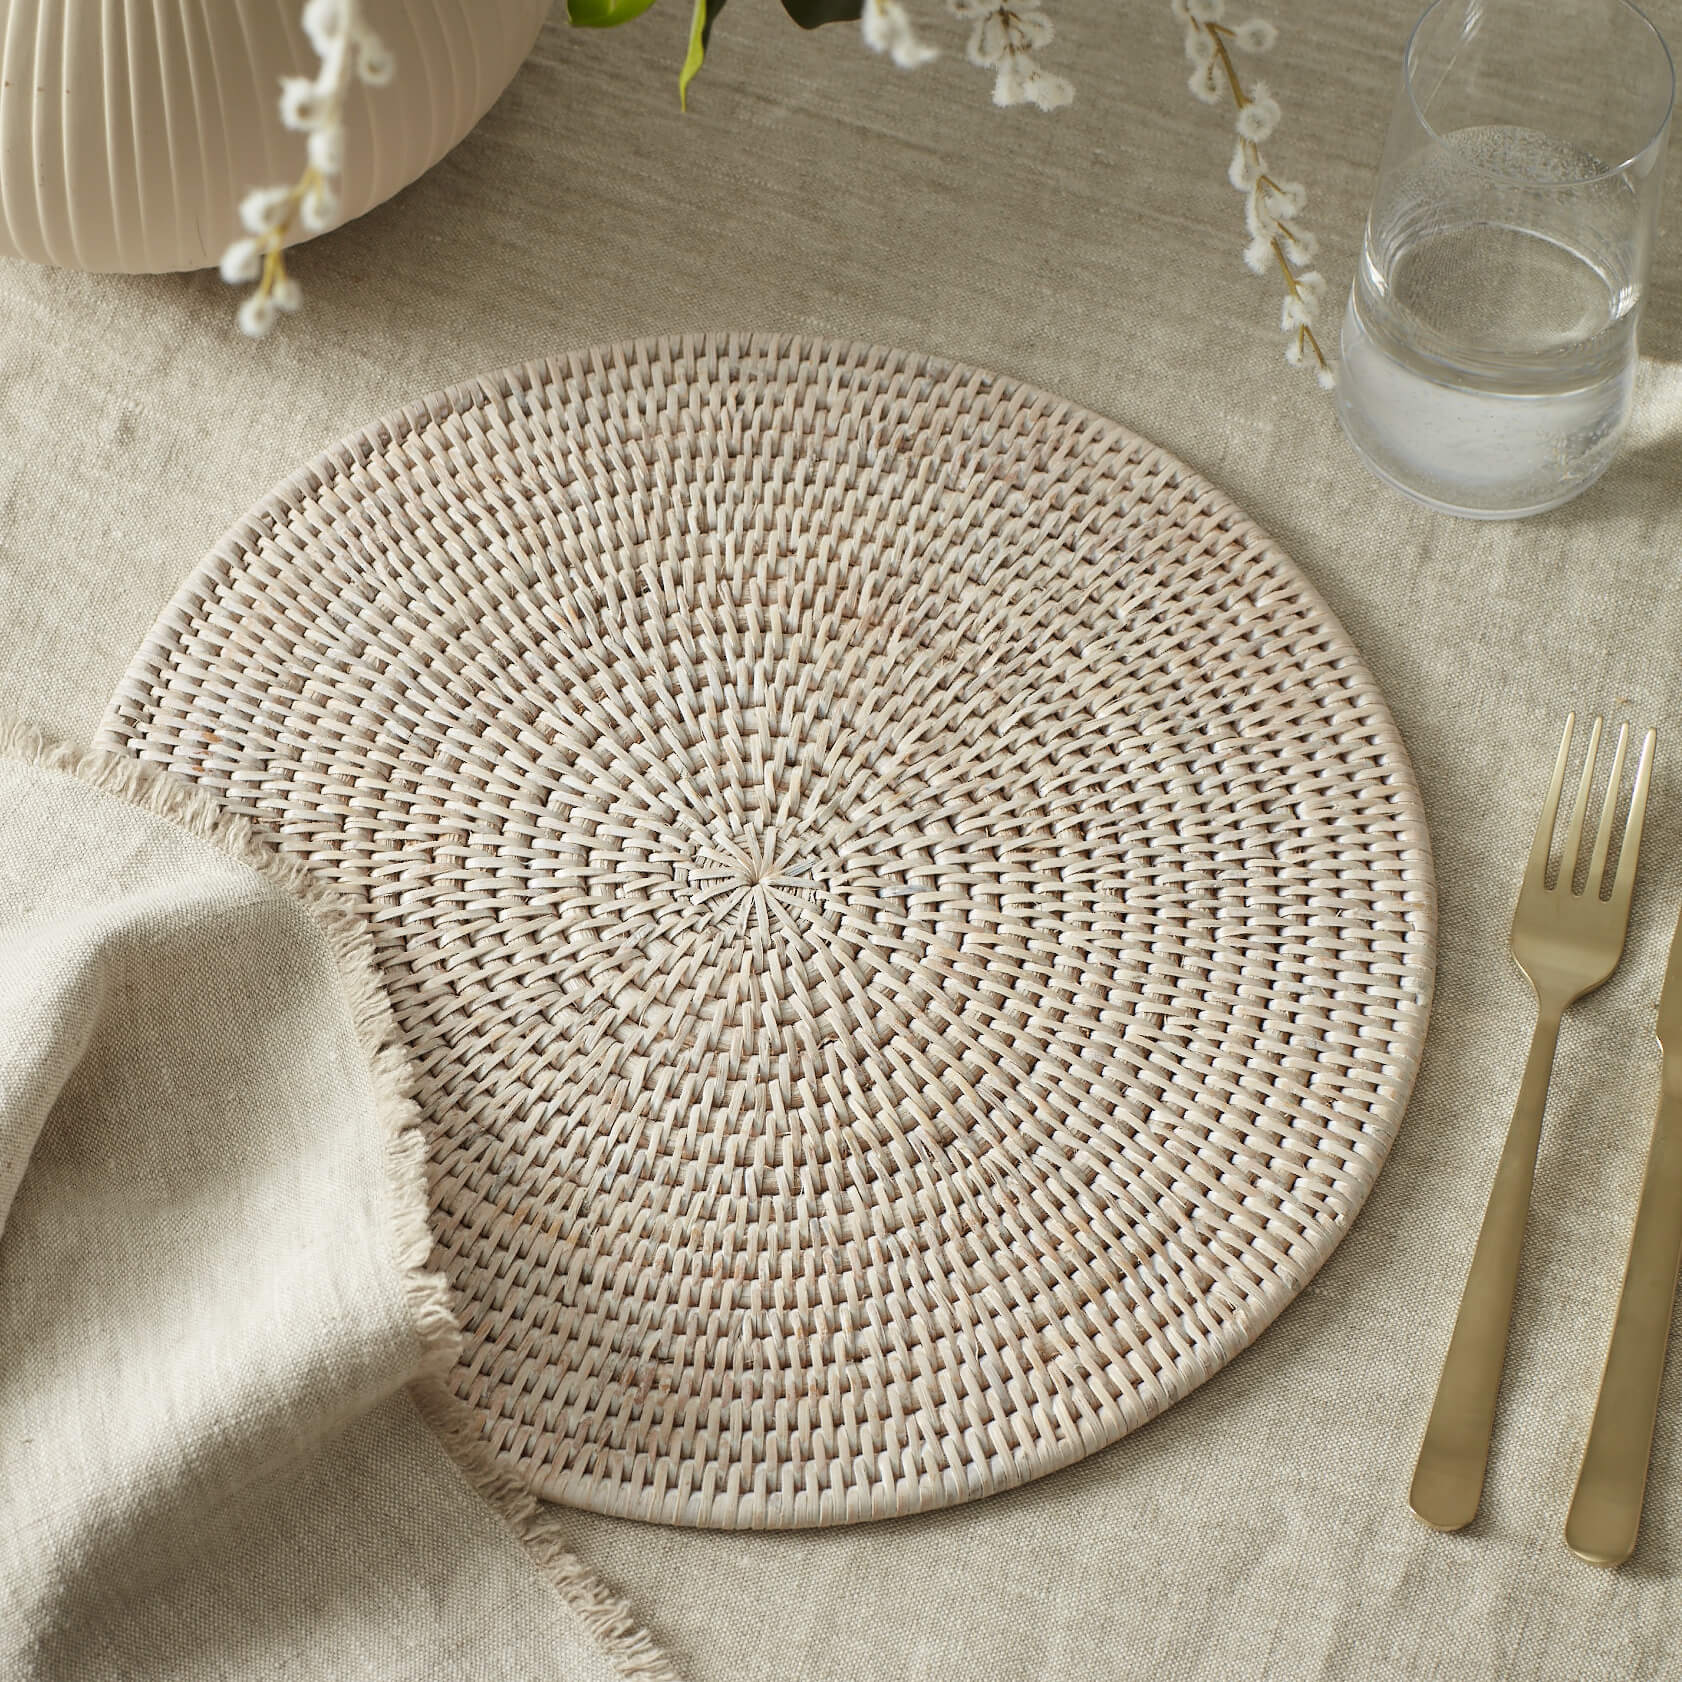 Set of 4 Rattan Placemats White